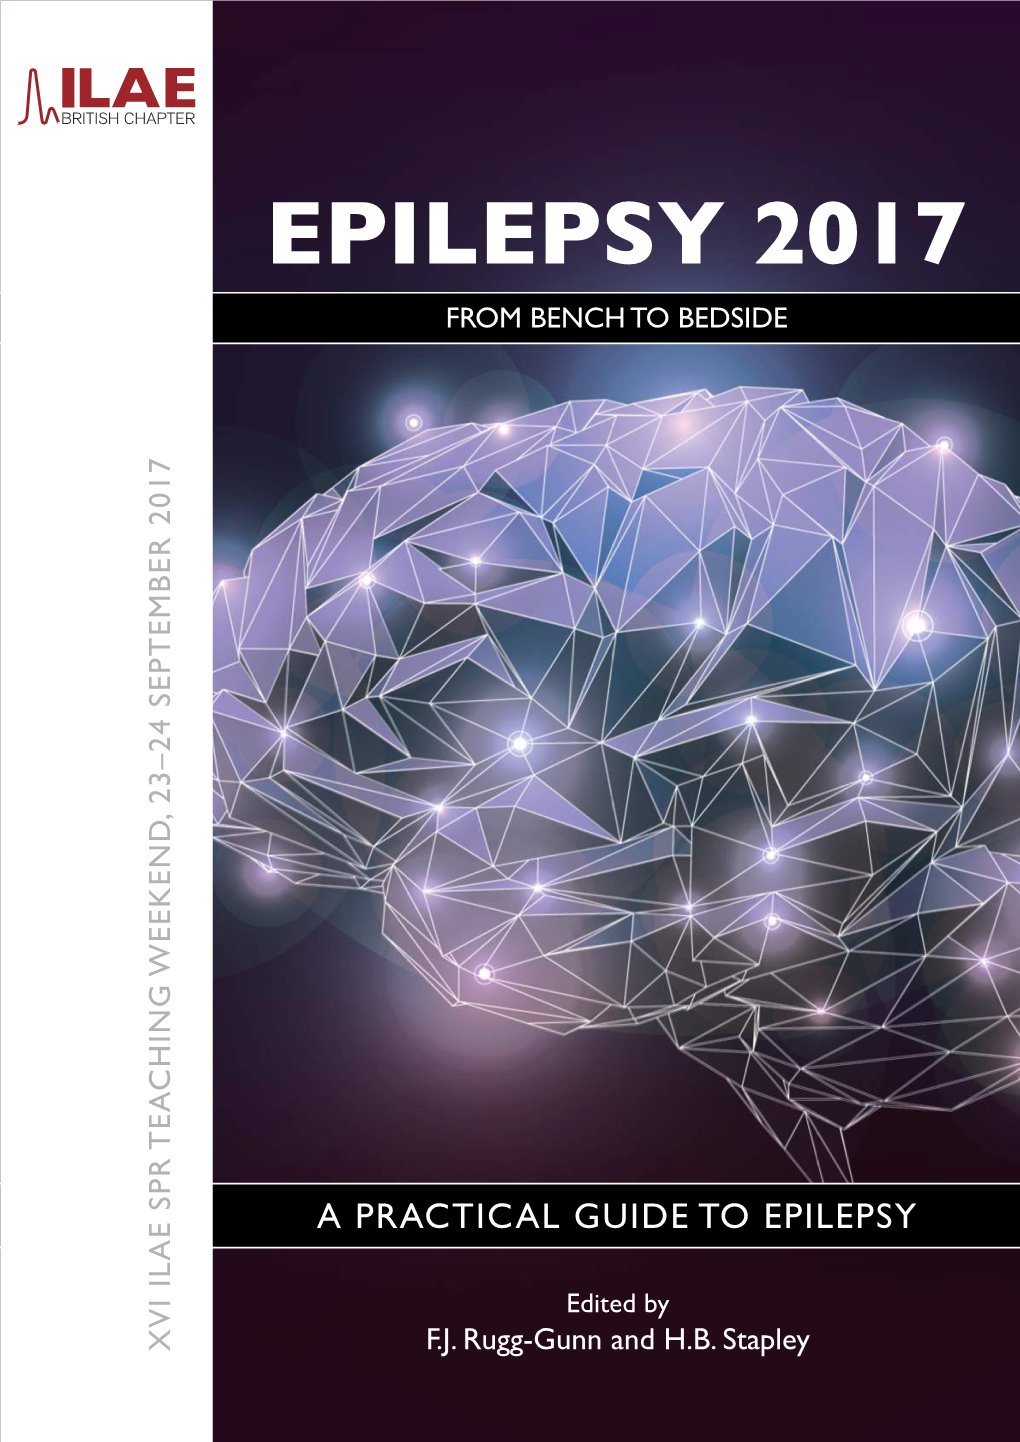 Epilepsy 2017 from Bench to Bedside 23–24 September 2017 Eaching Weekend, Weekend, Eaching